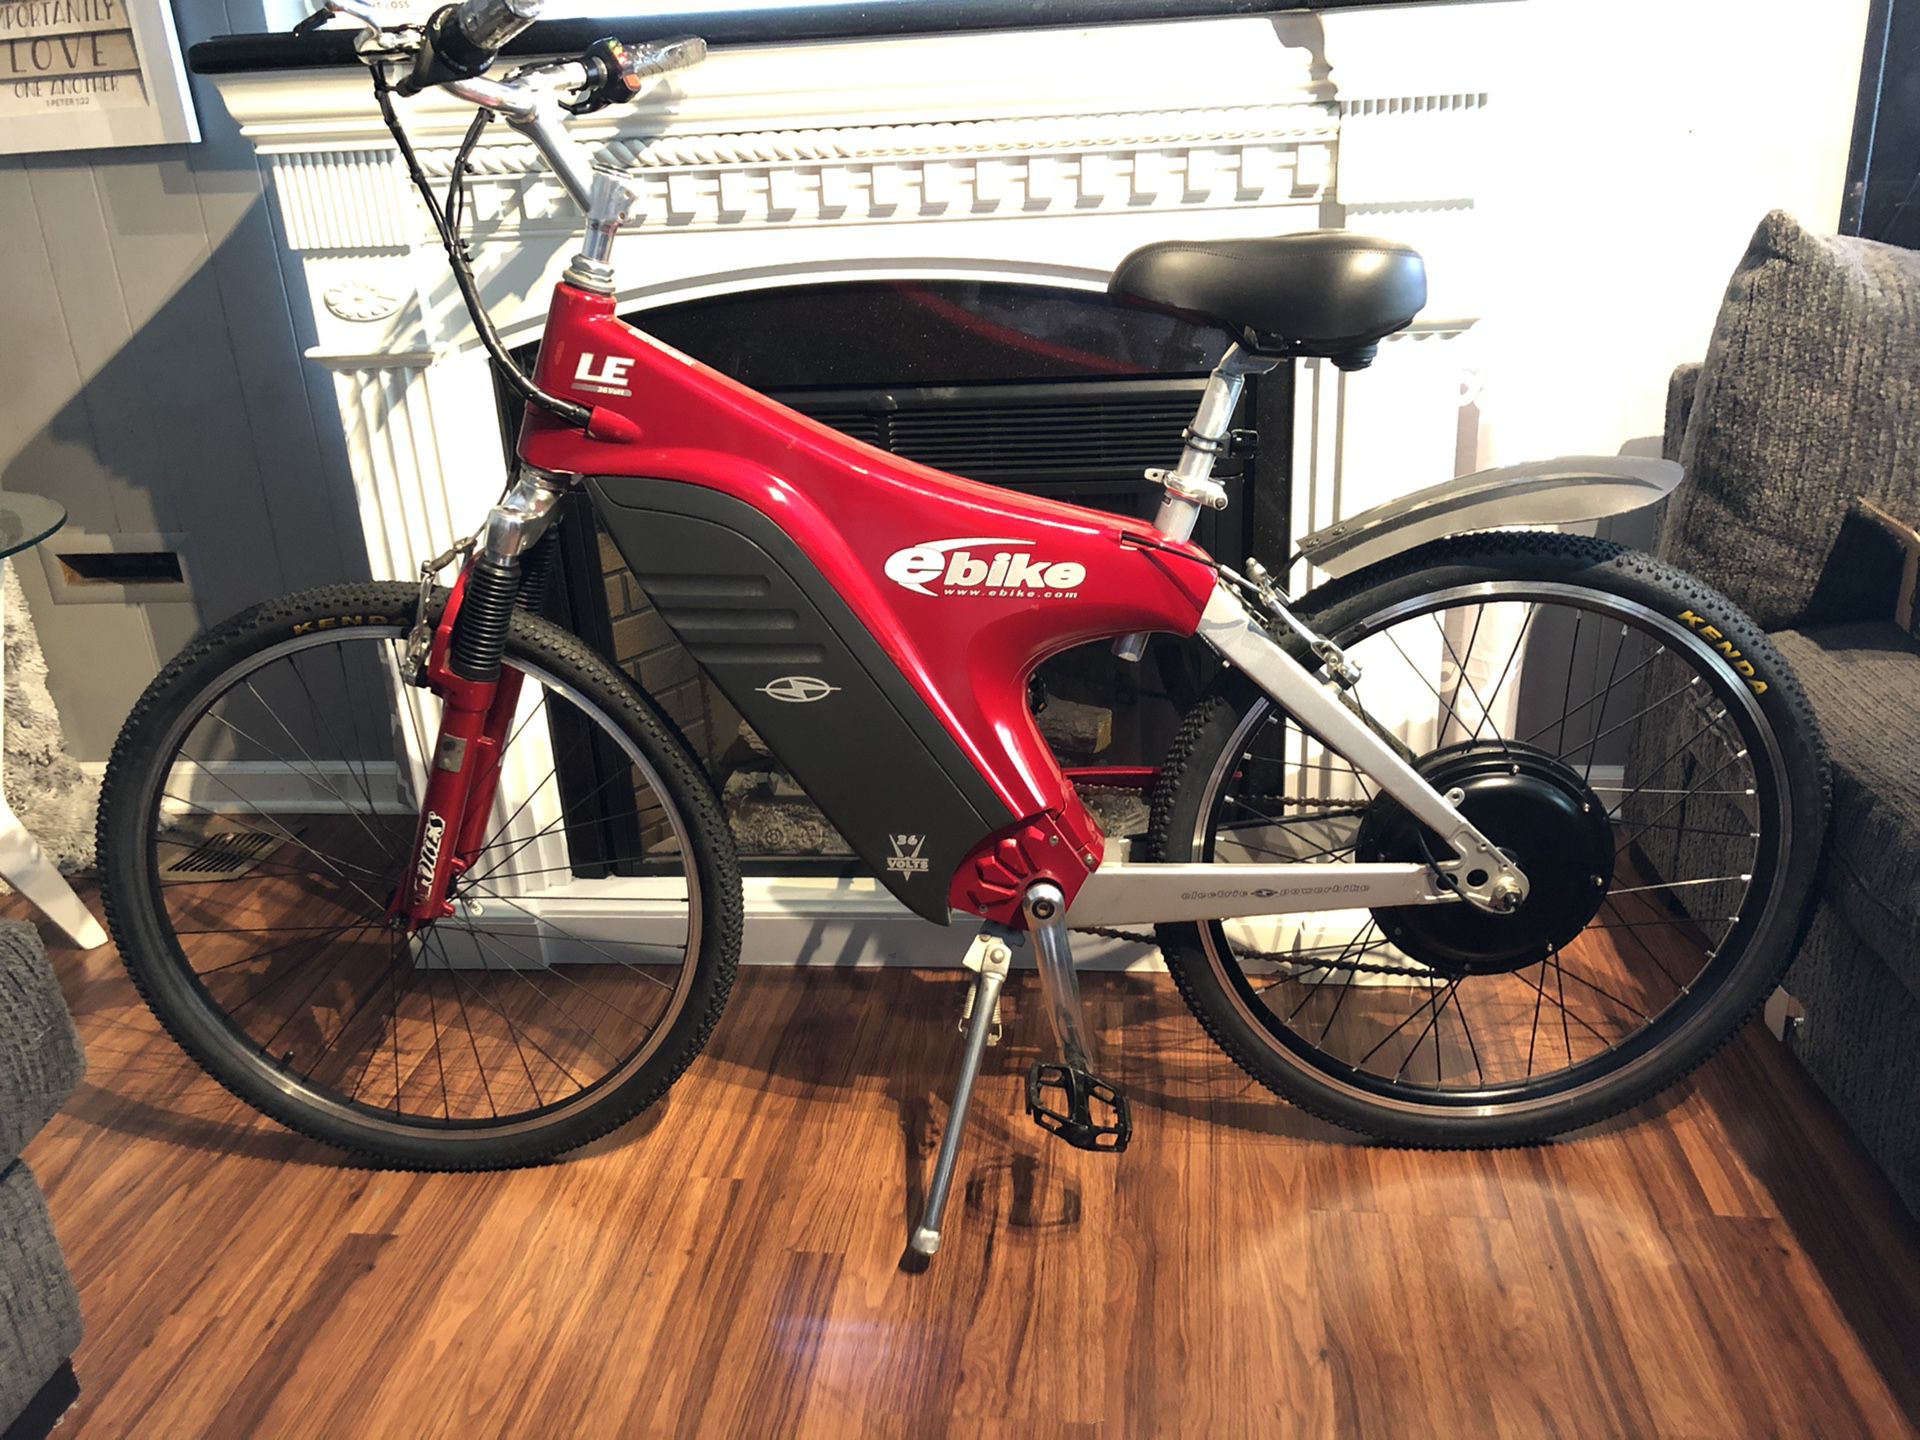 Custom built EVG eBike SX model with new 1500watt motor and 54v lithium battery electric bicycle FAST Bike!